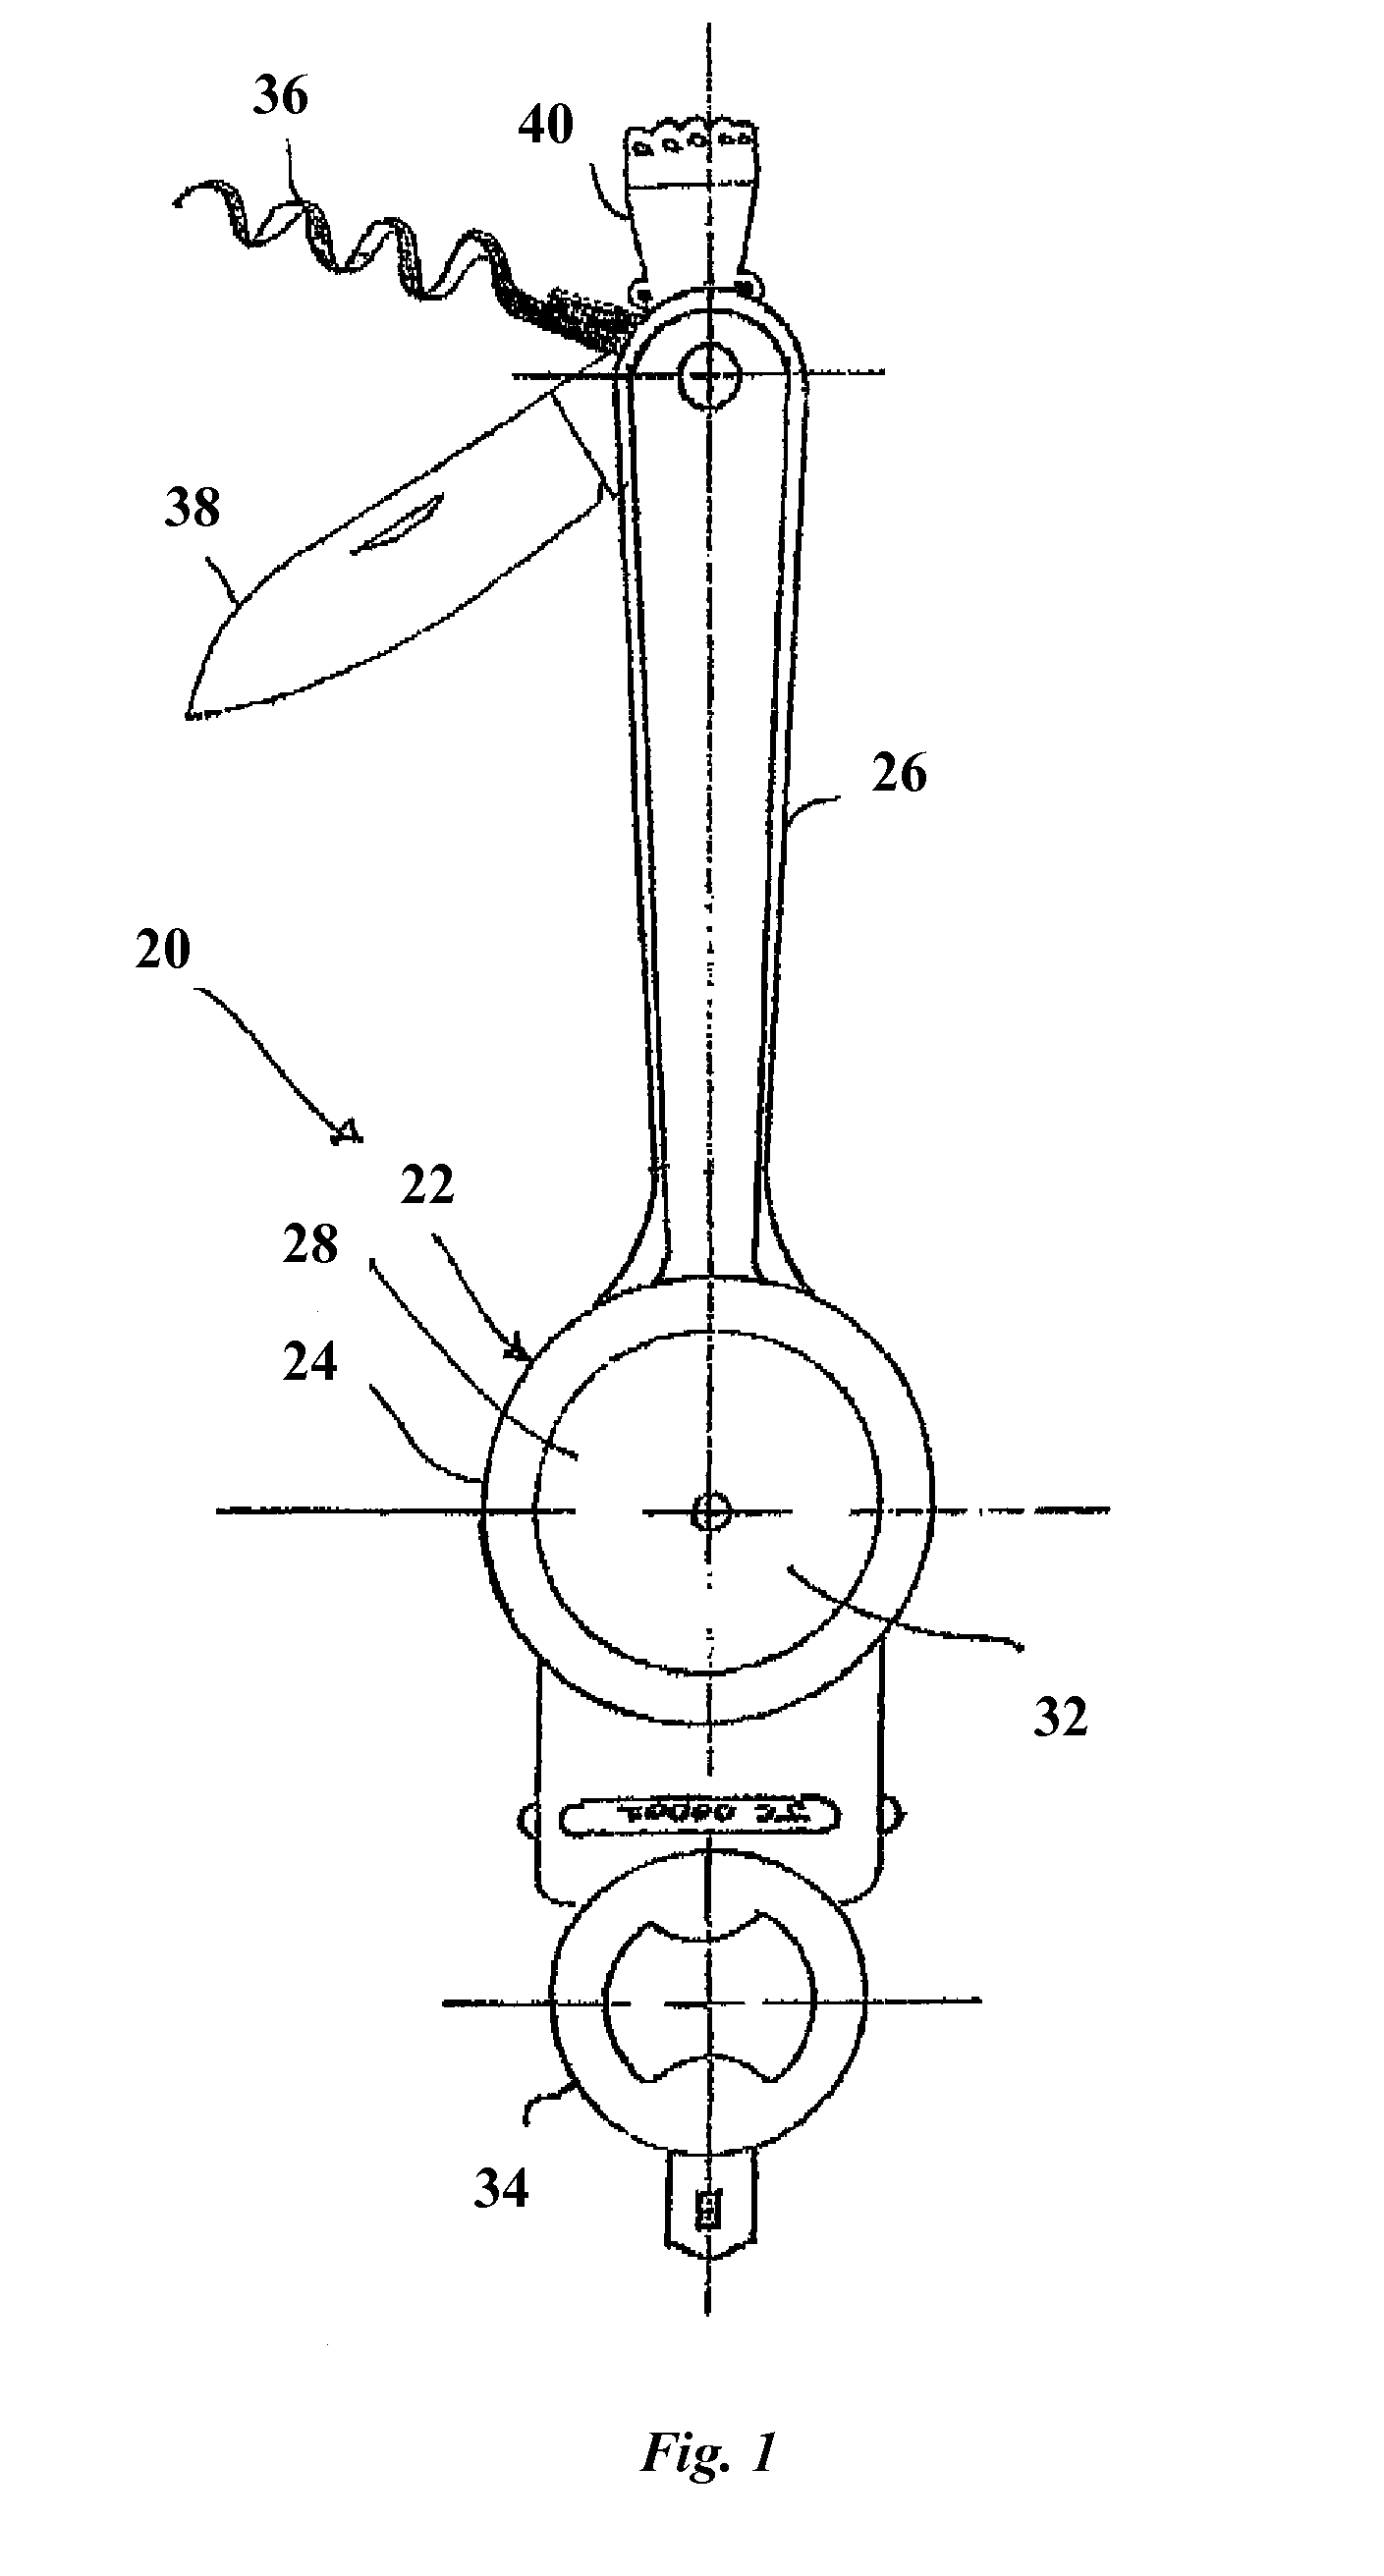 Multi-functional bartender's tool and related methods